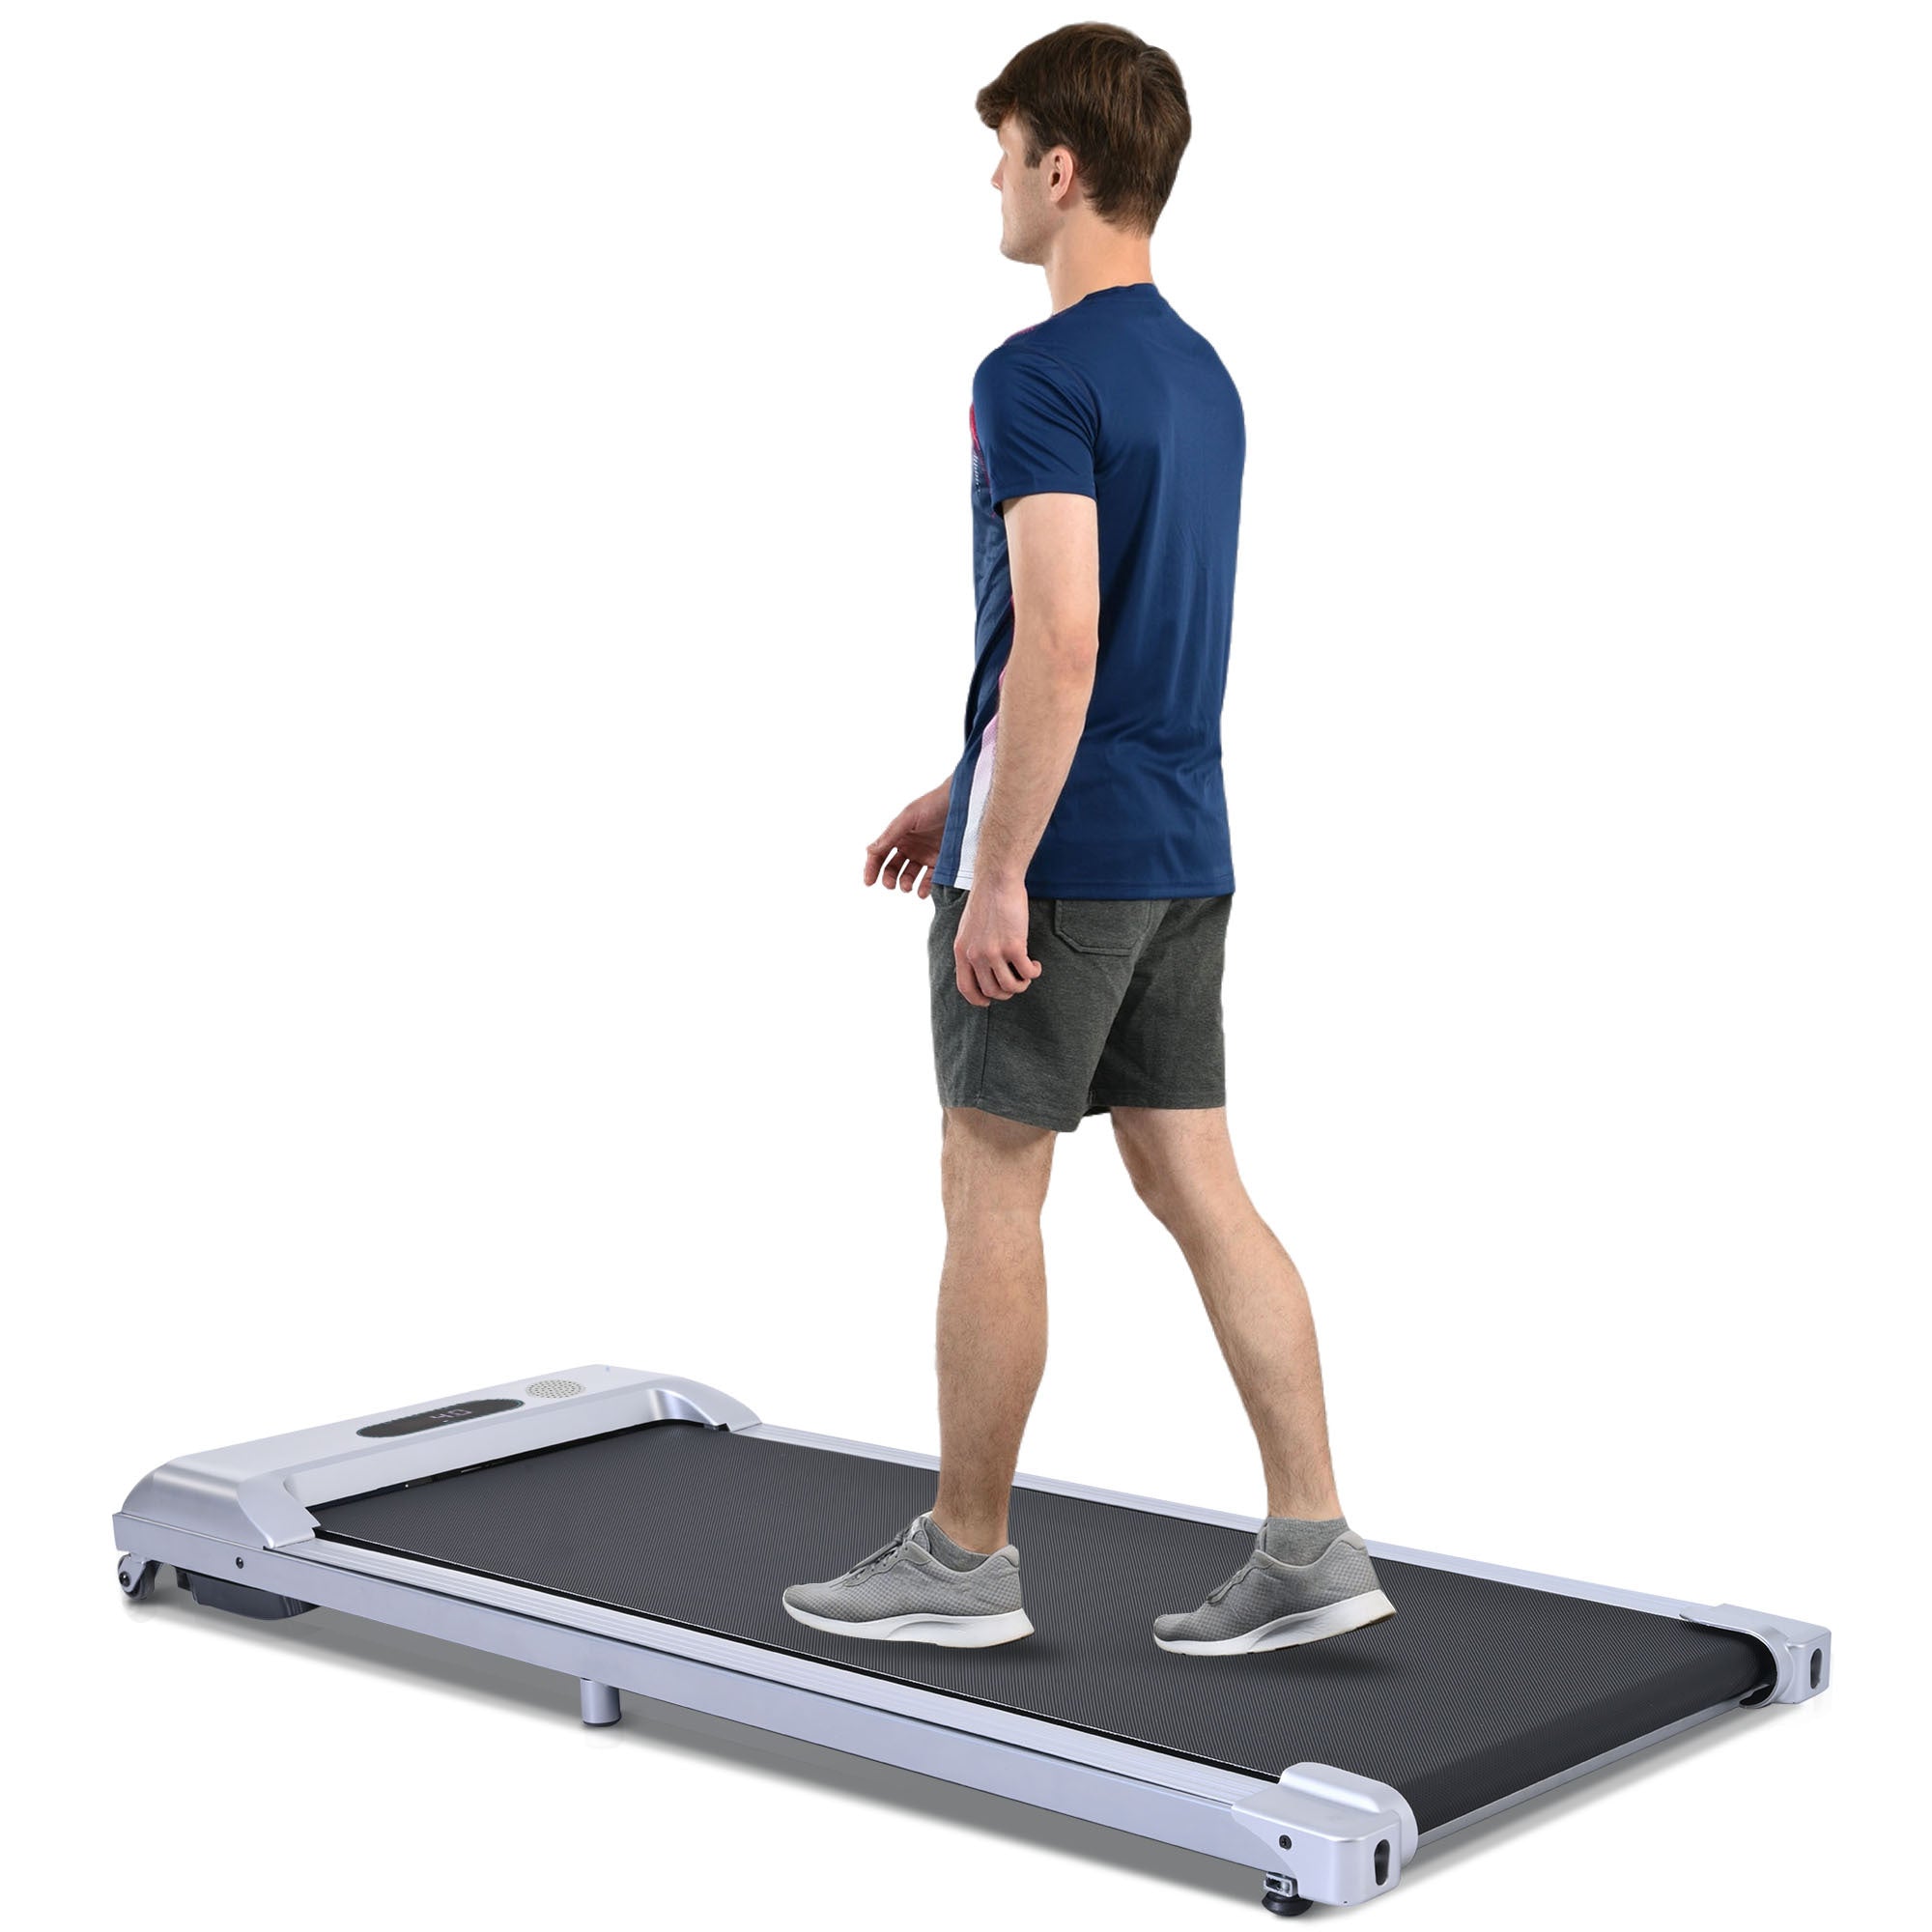 2 in 1 Under Desk Electric Treadmill 2.5HP, with silver-metal